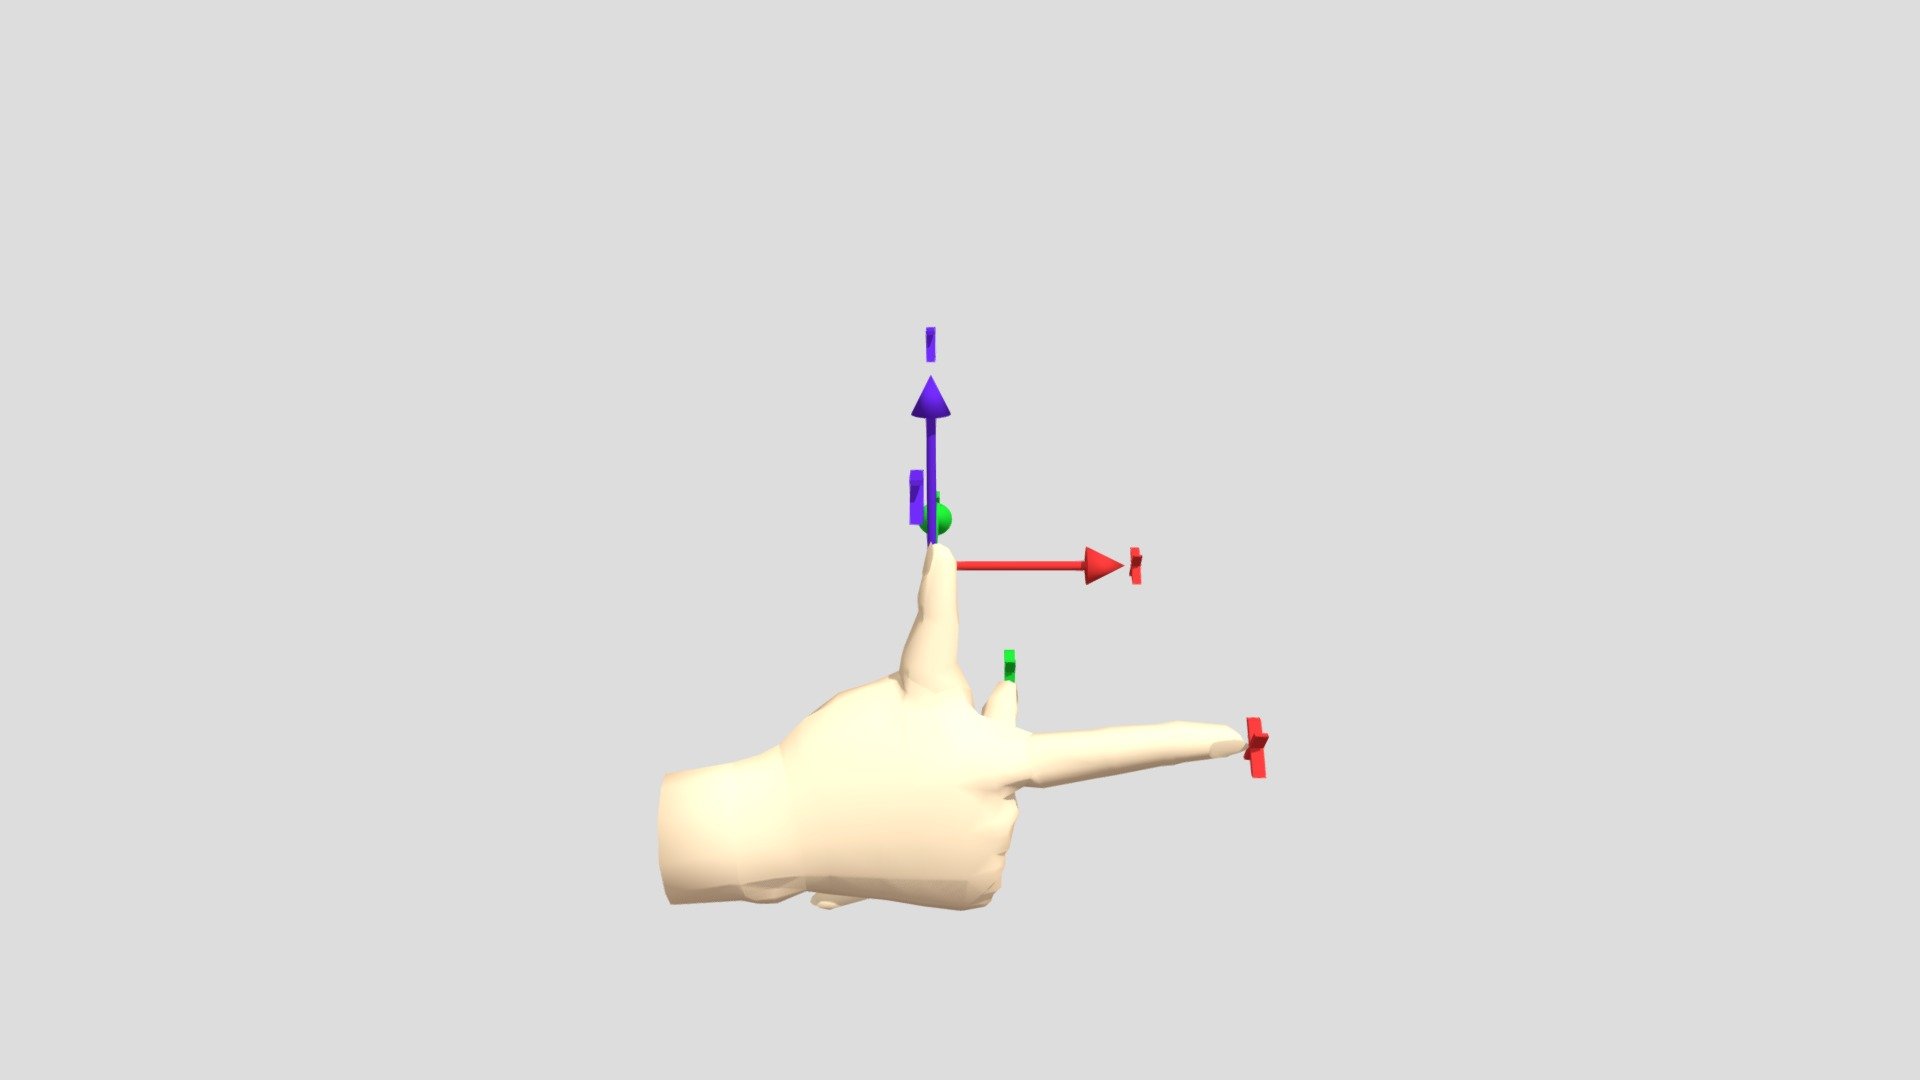 Right hand Rule and Axis - Download Free 3D model by Pummarin (@Pummarin)  [6910c8f]